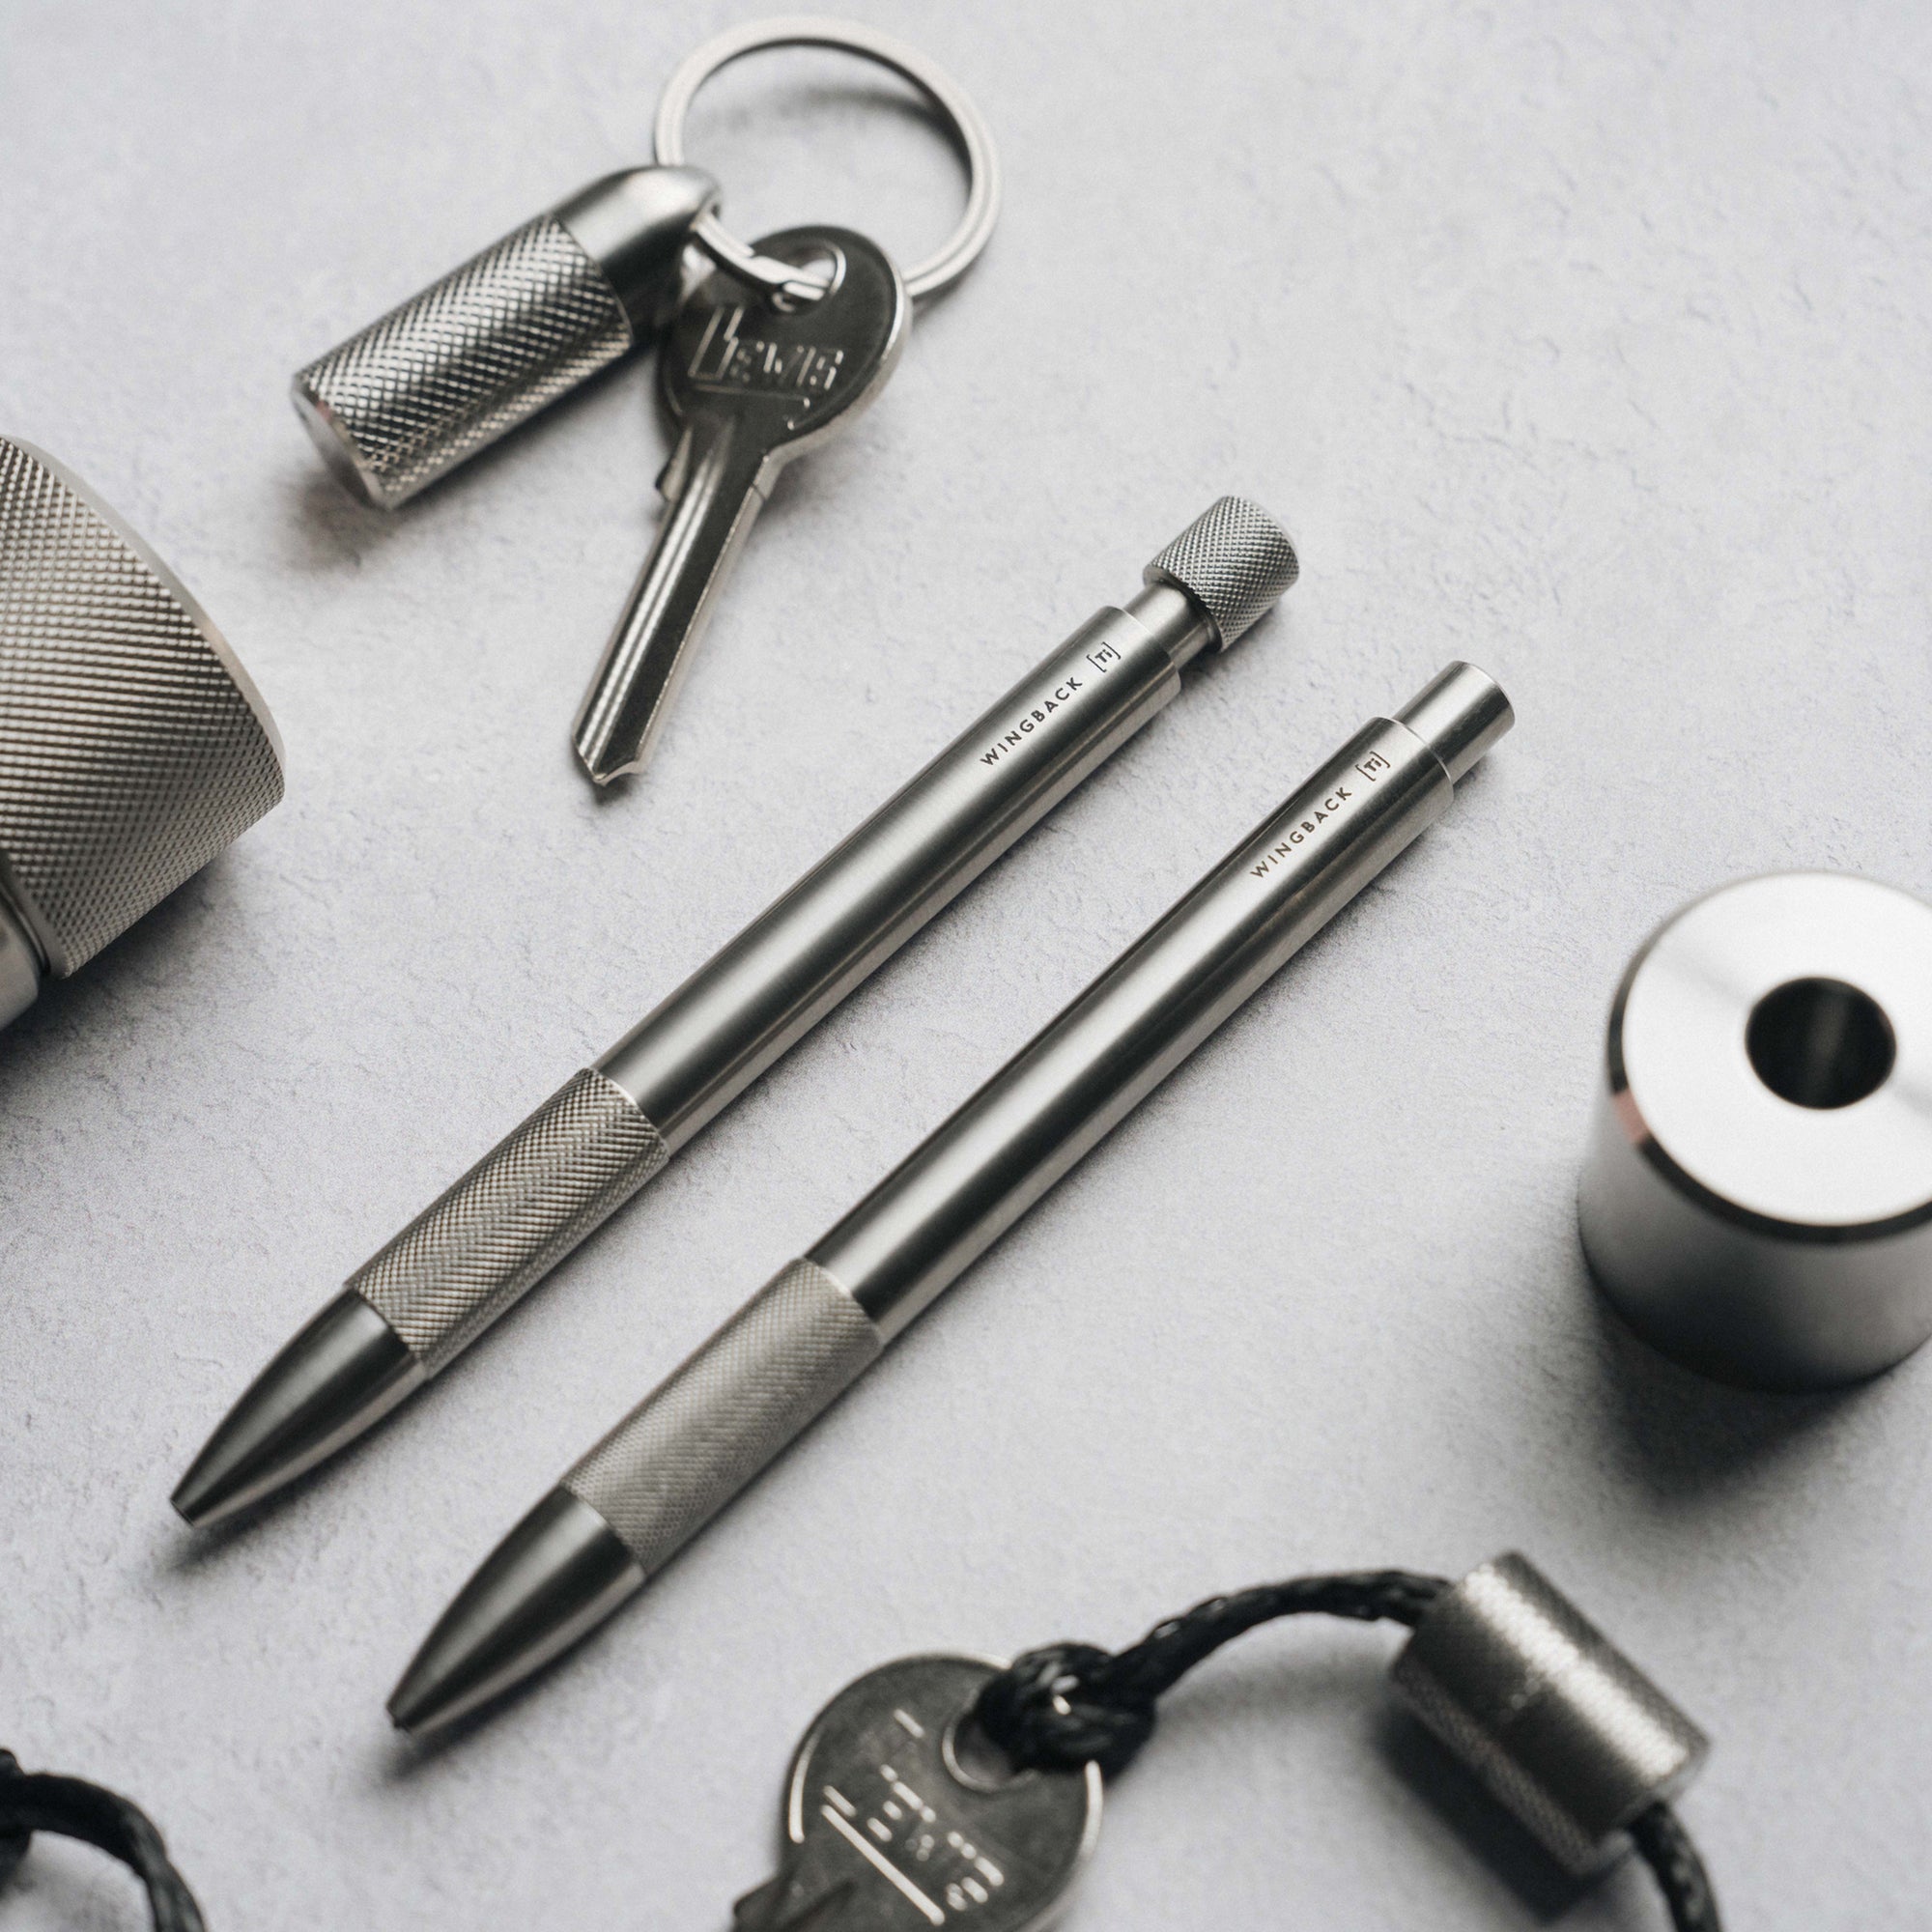 Titanium EDC gear by Wingback including a mechanical pen and pencil